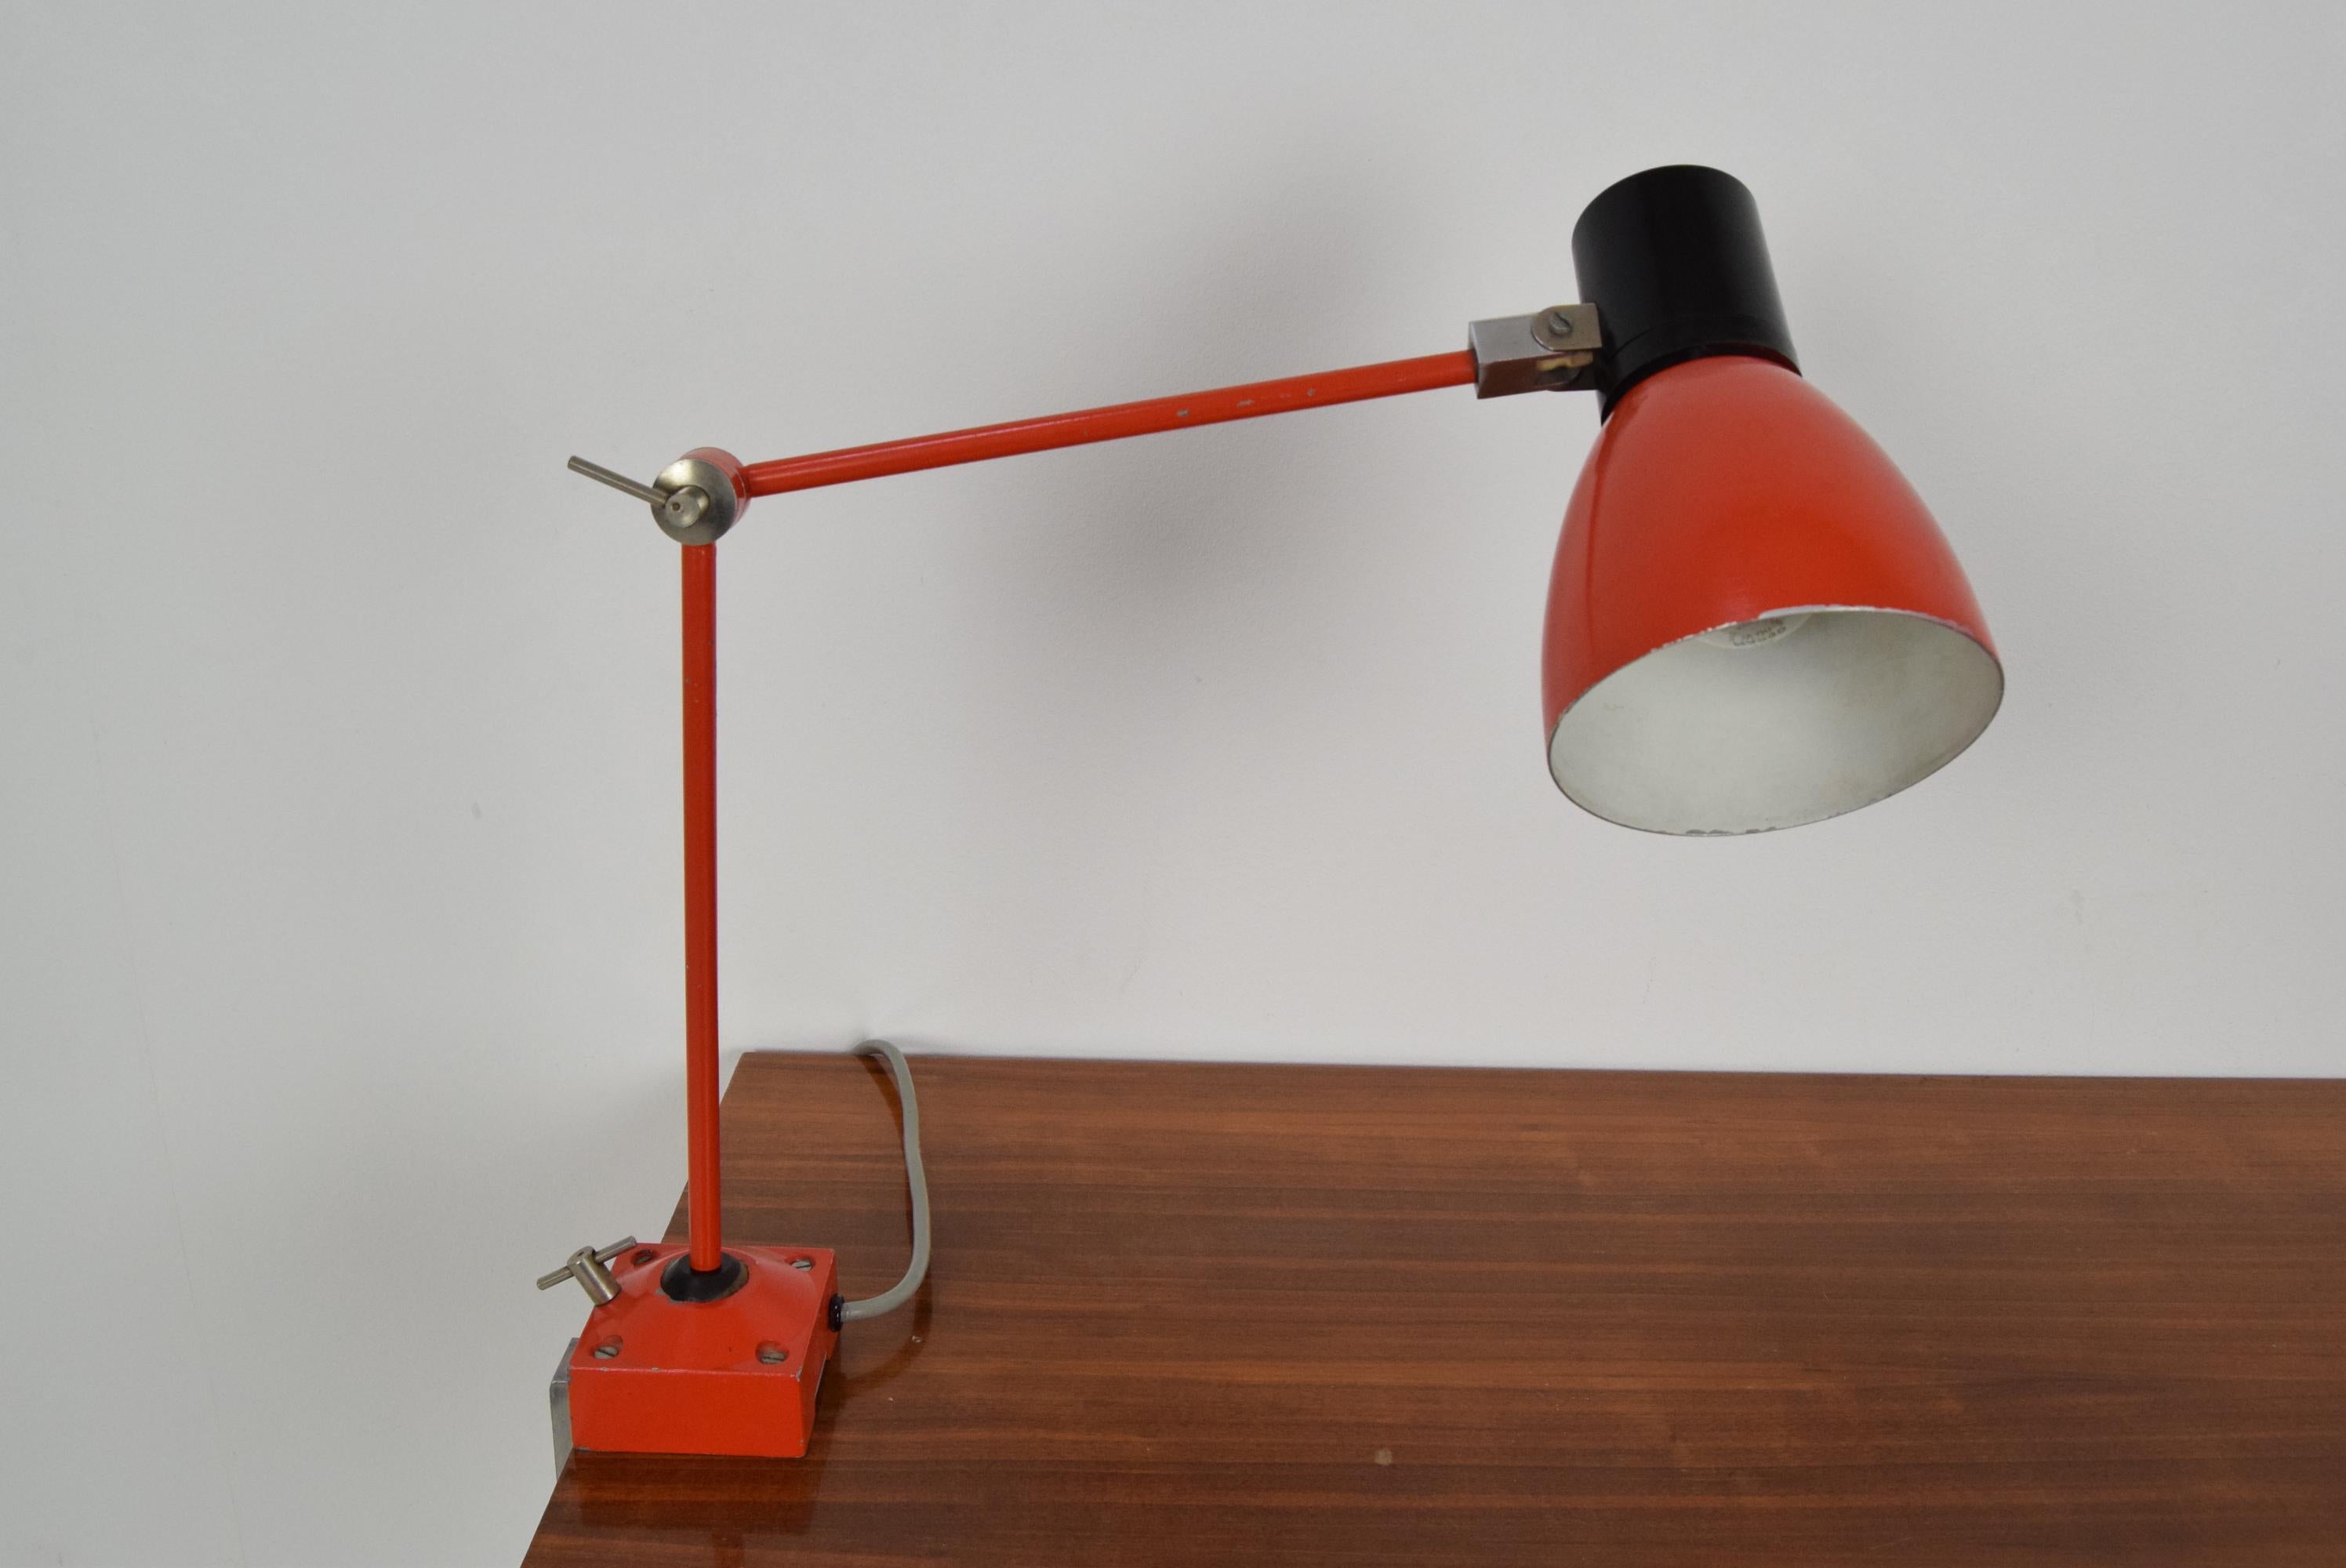 Made of Metal,Bakelite
1x60W,E27 or E26 socket
With aged patina
Re-polished
Fully Functional
Original condition.